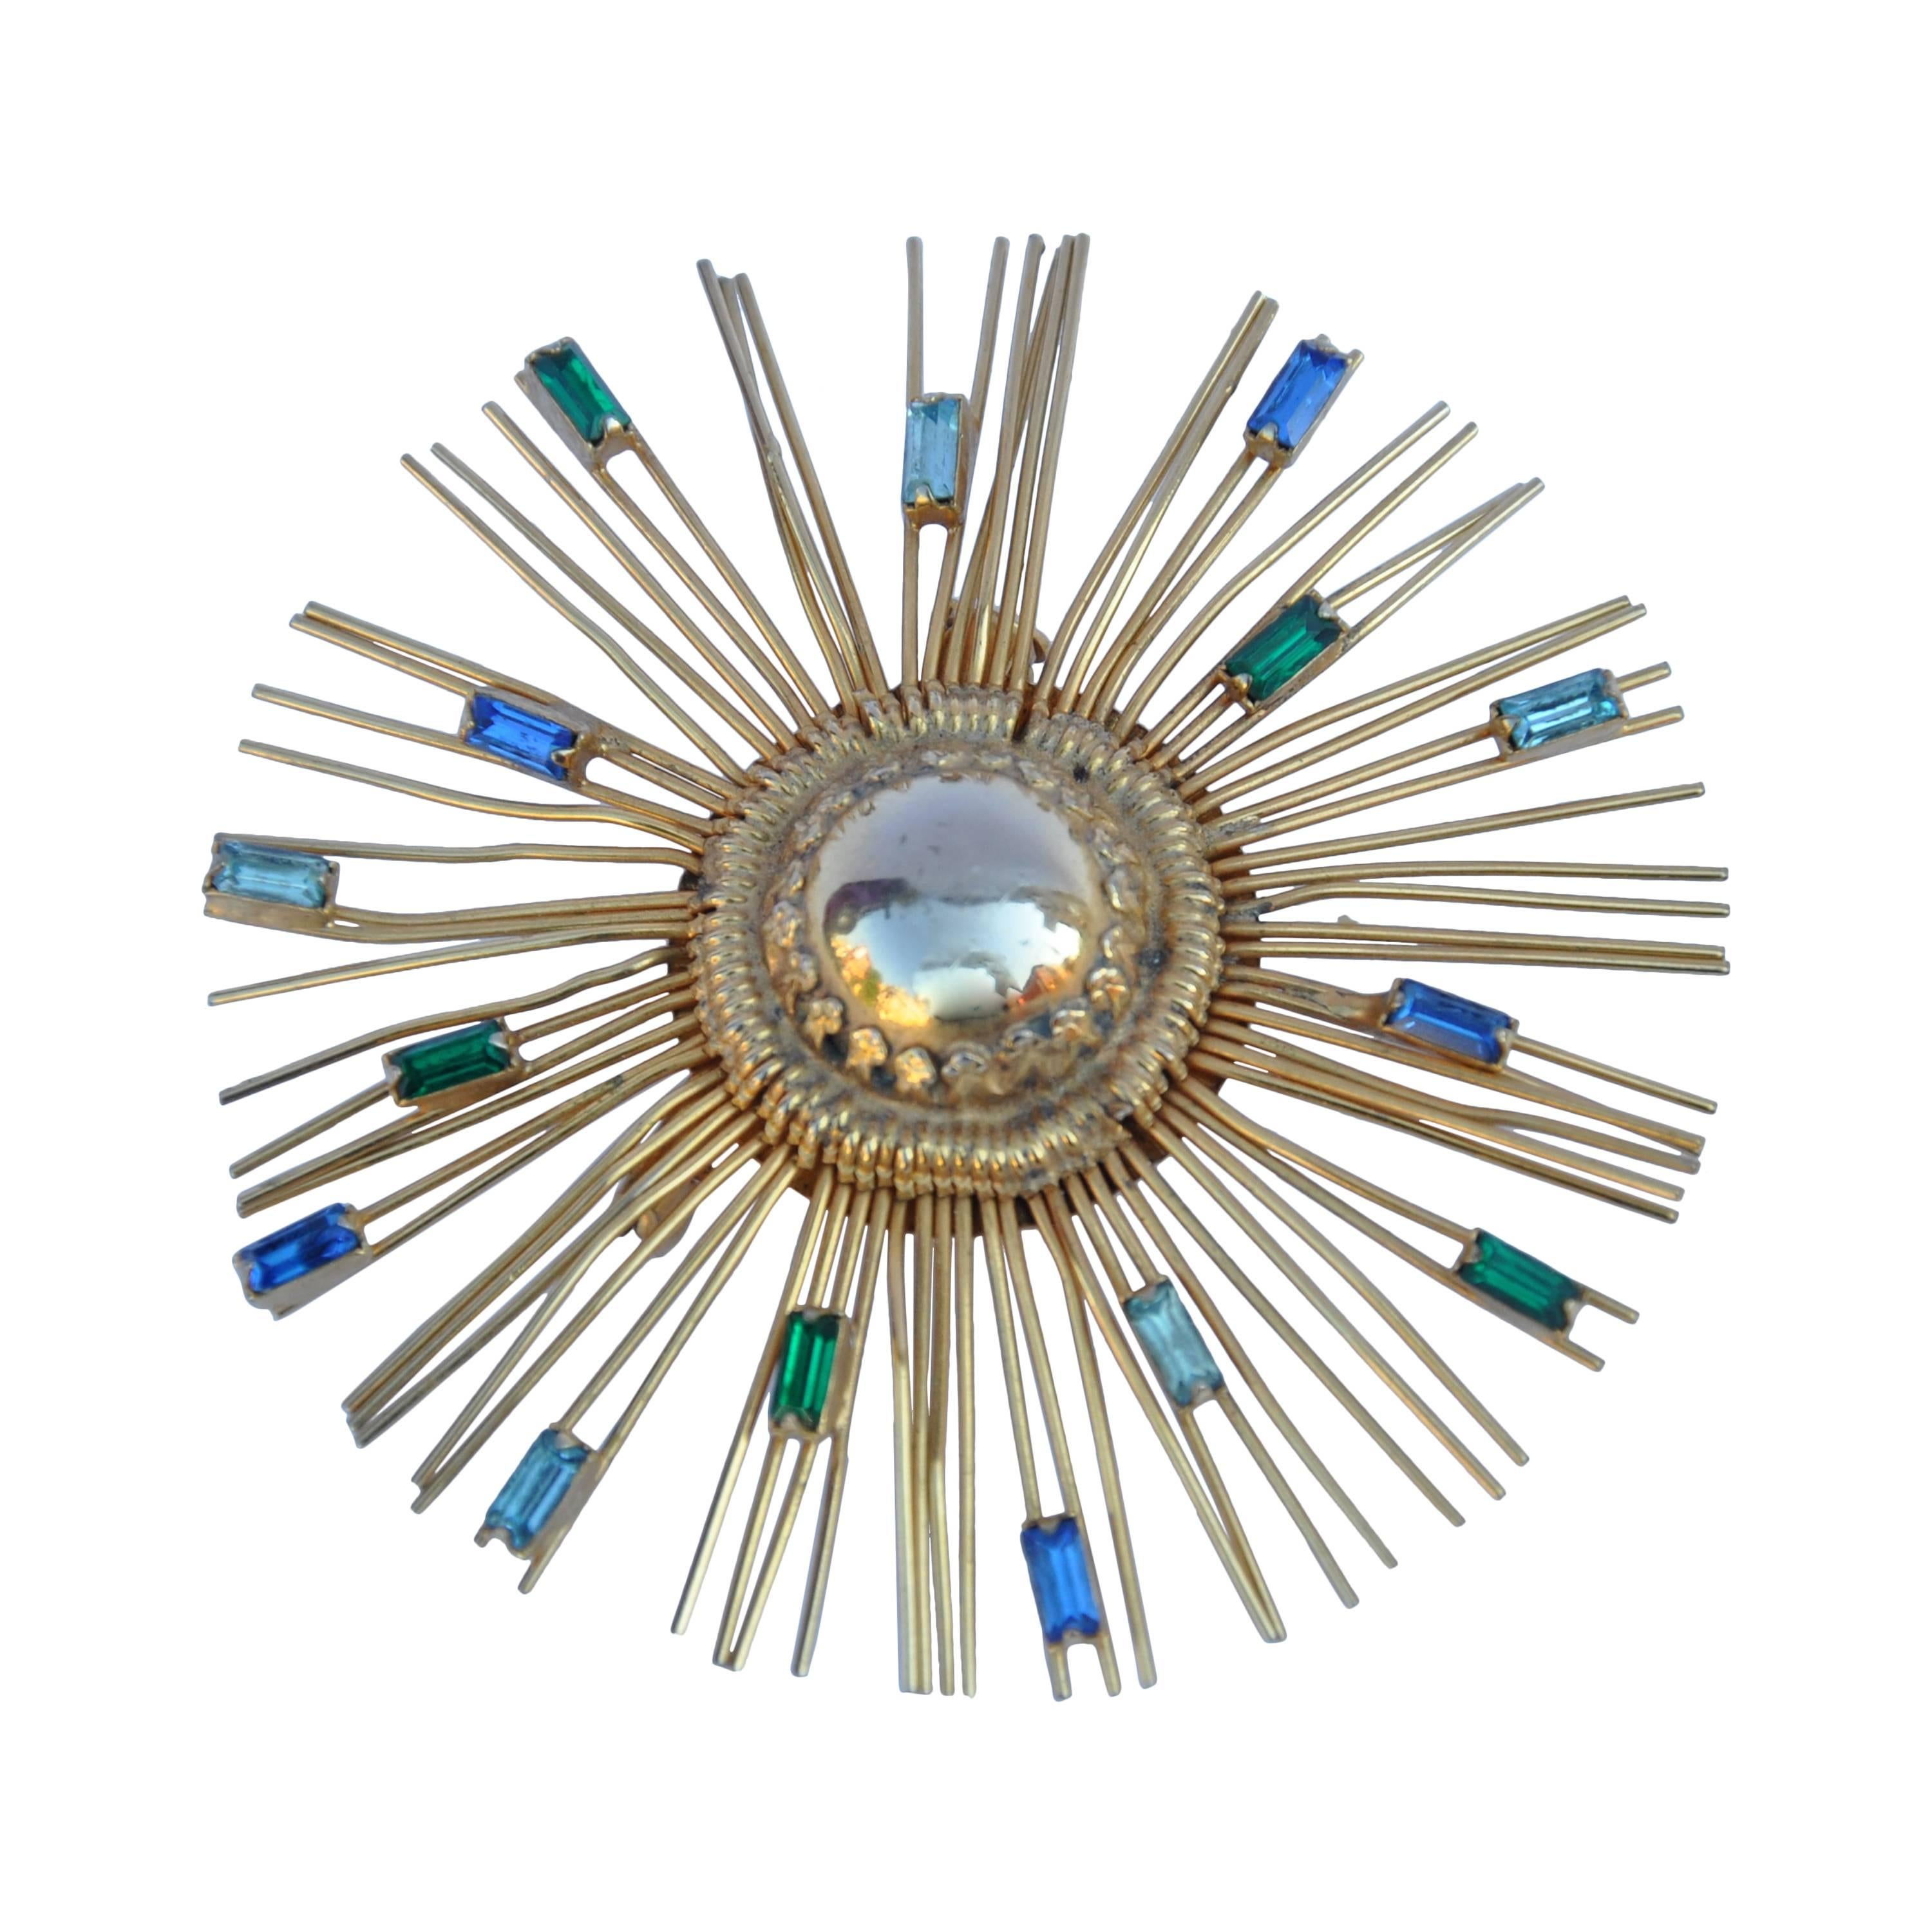 Huge "Starburst" Brooch with Multiple Shades of Blue & Green Accent